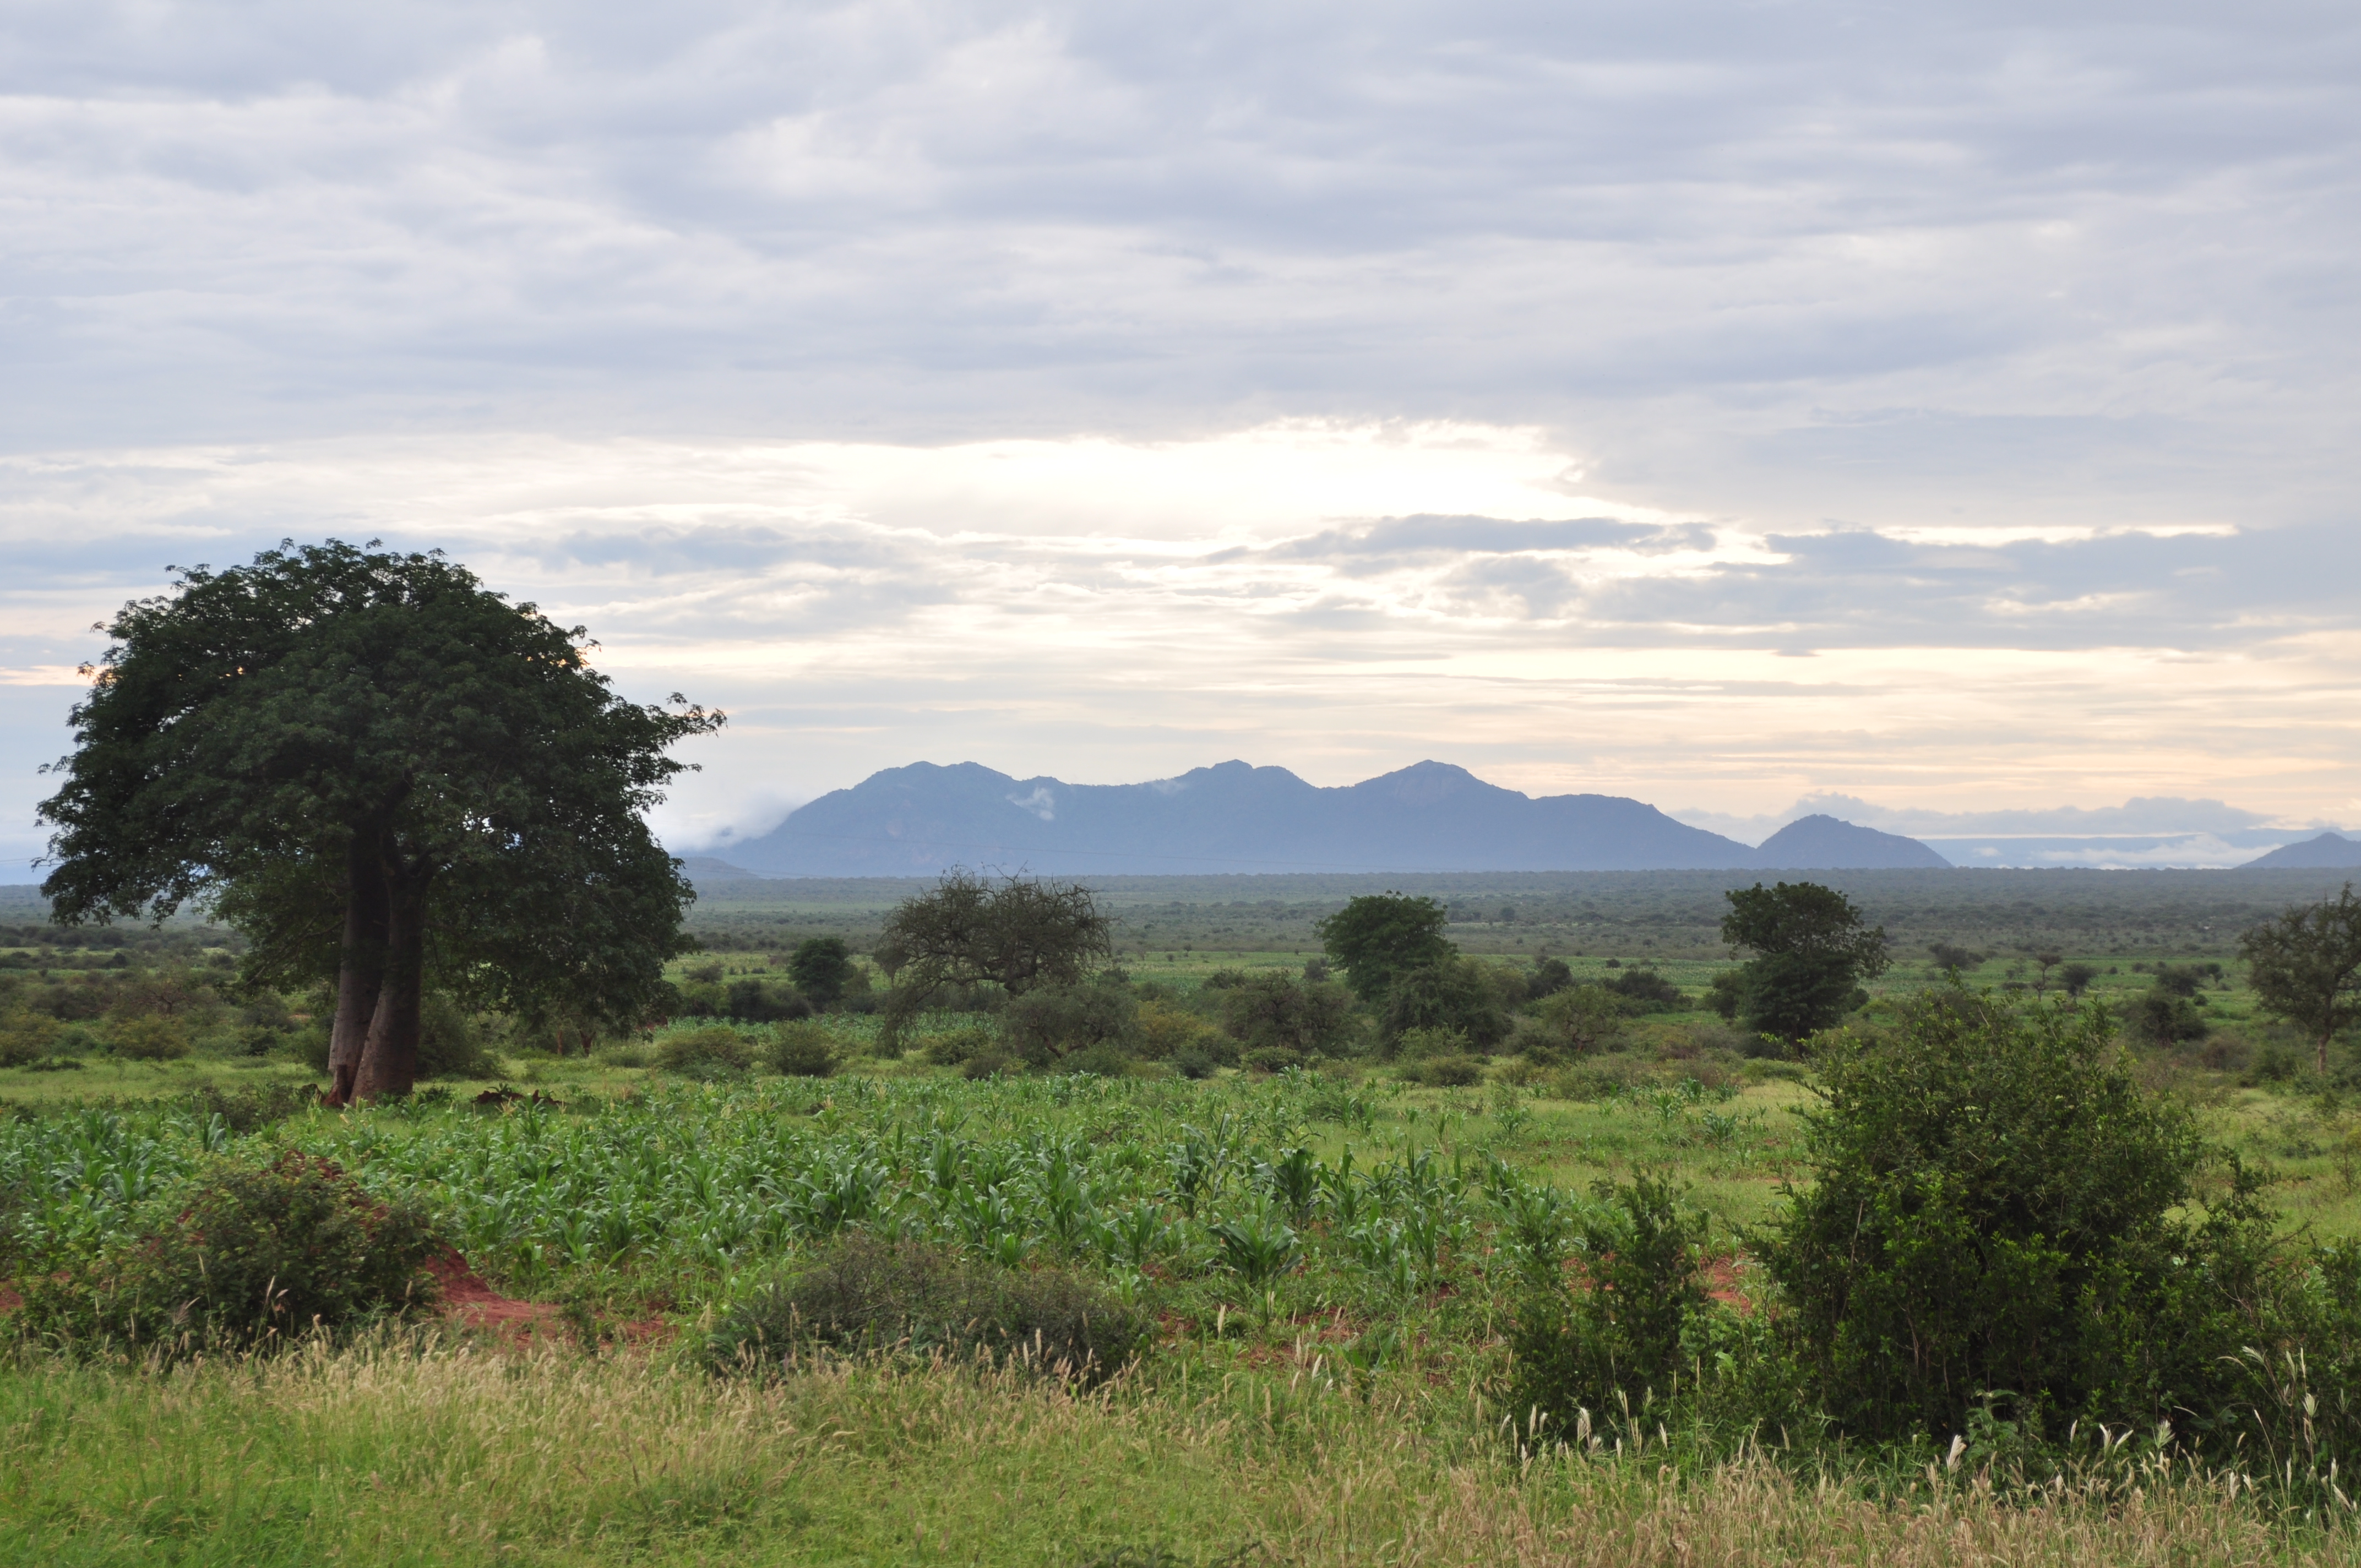 Image: North Pare mountains in Tanzania with maize fields in foreground